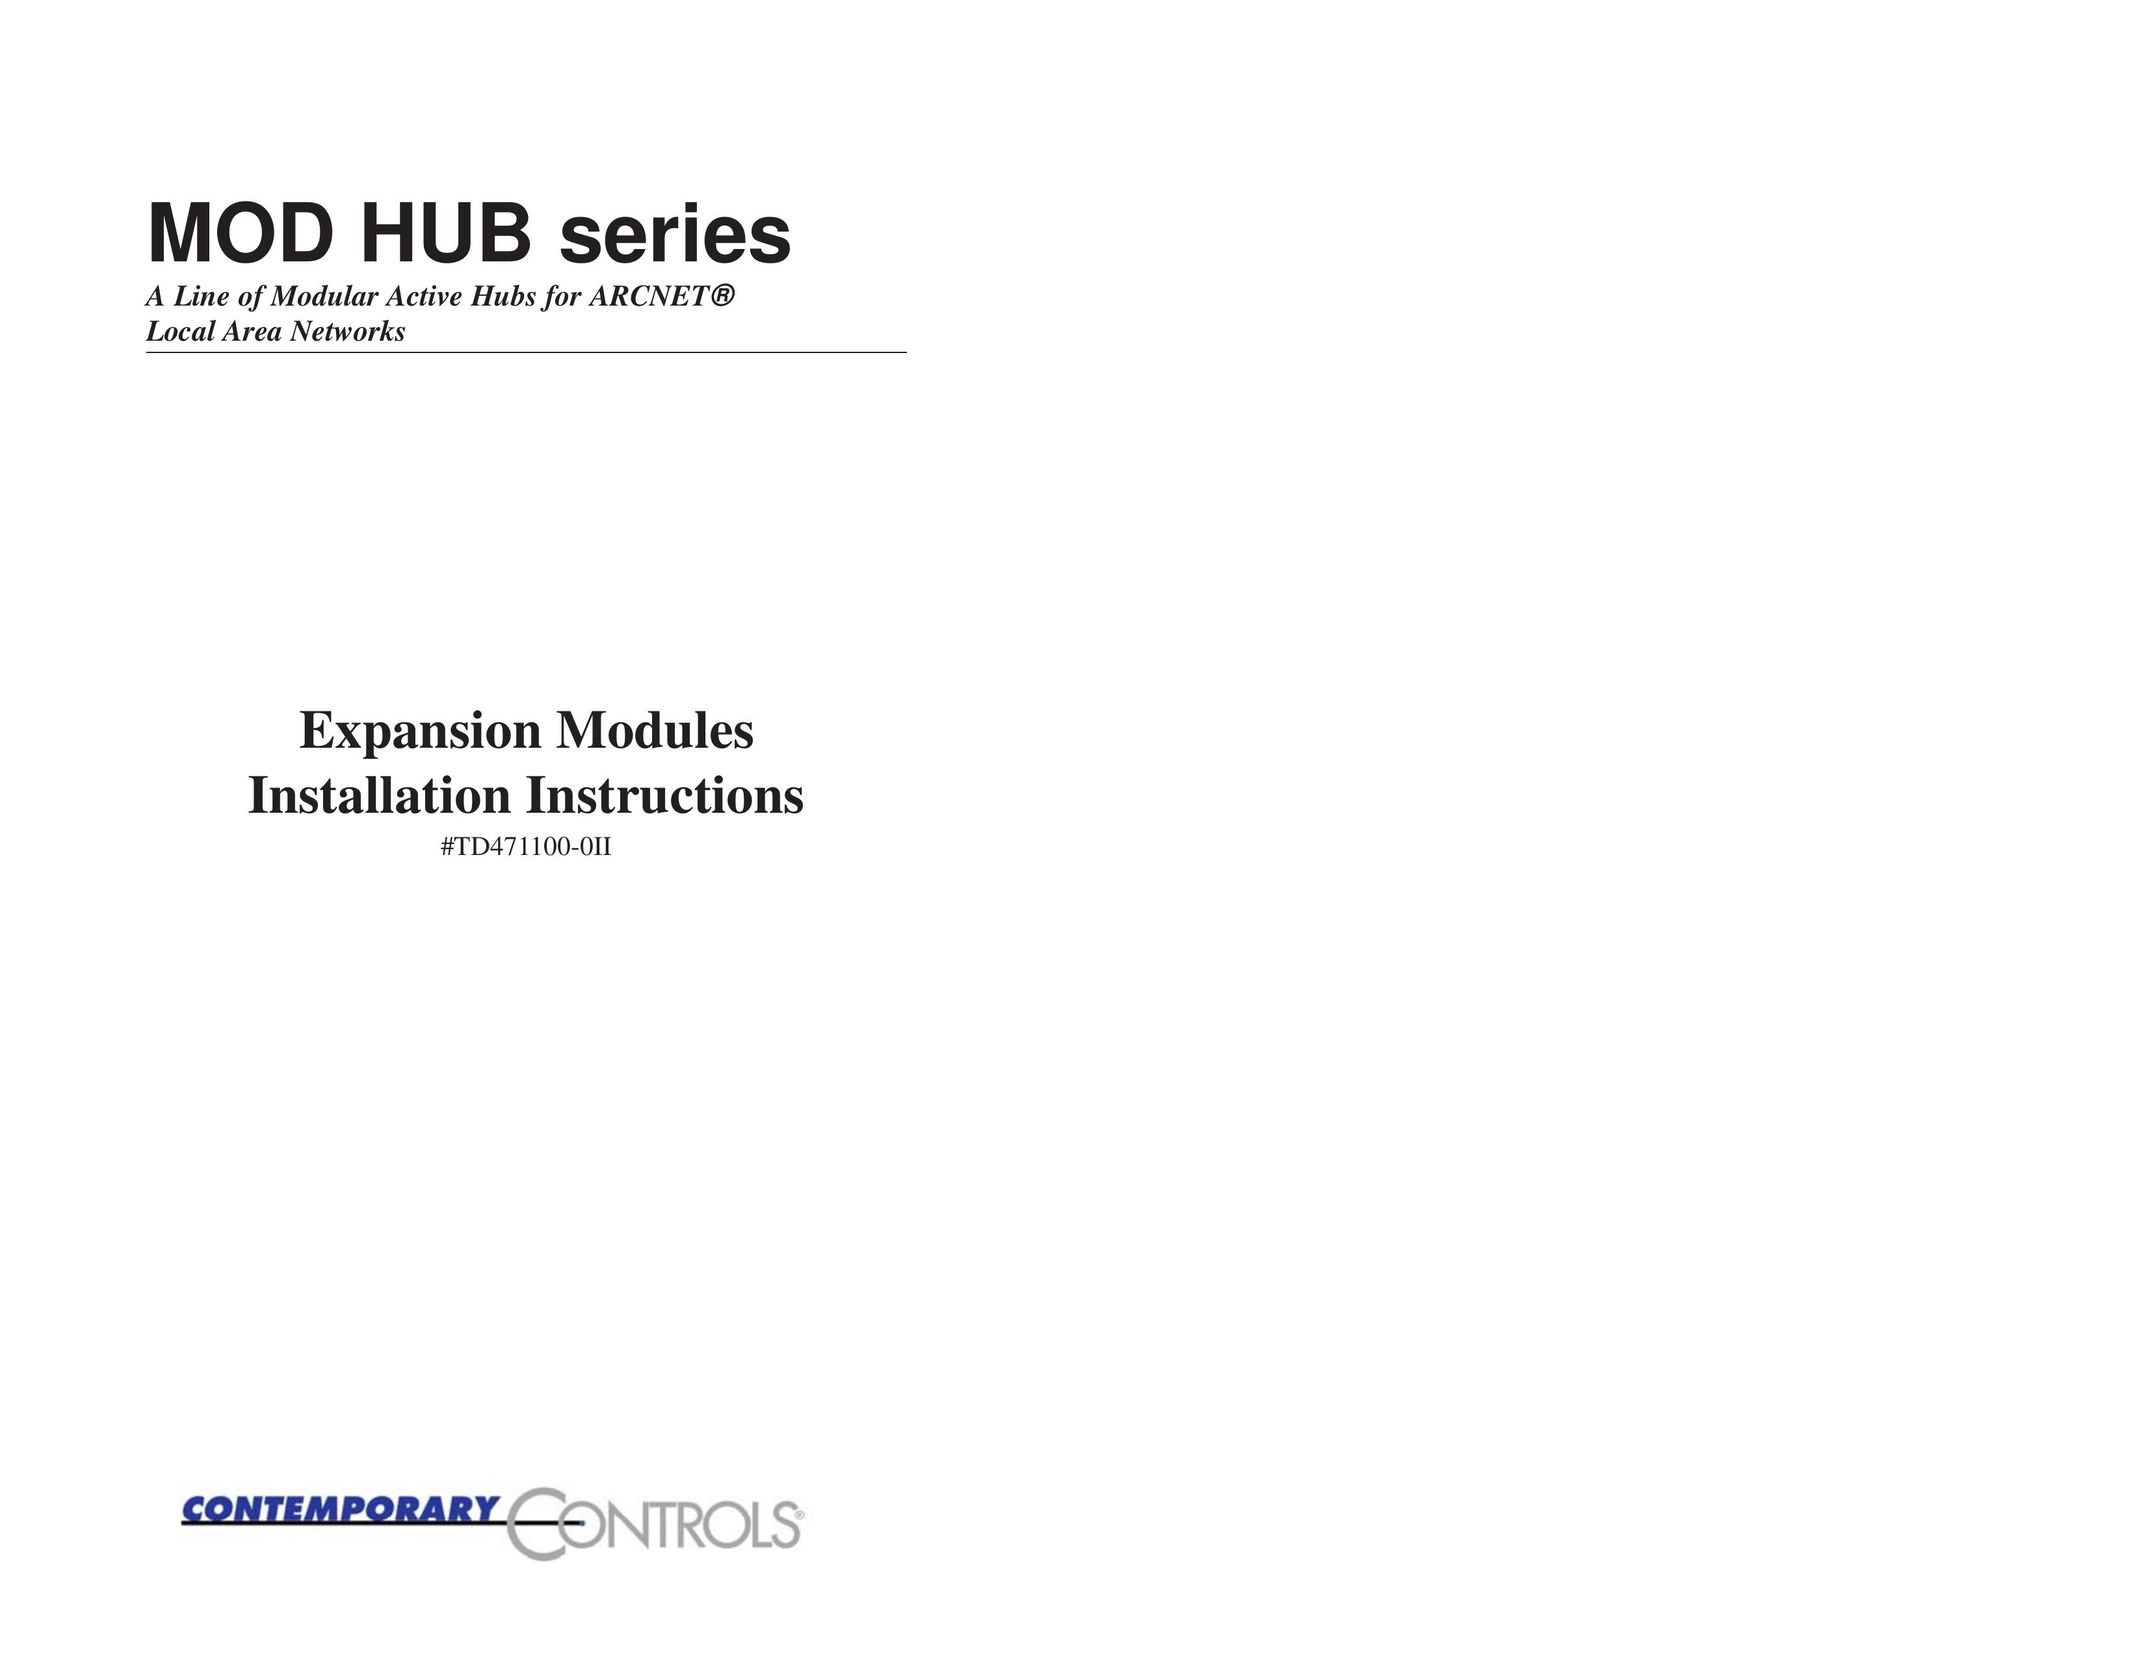 Contemporary Research MOD HUB series Switch User Manual